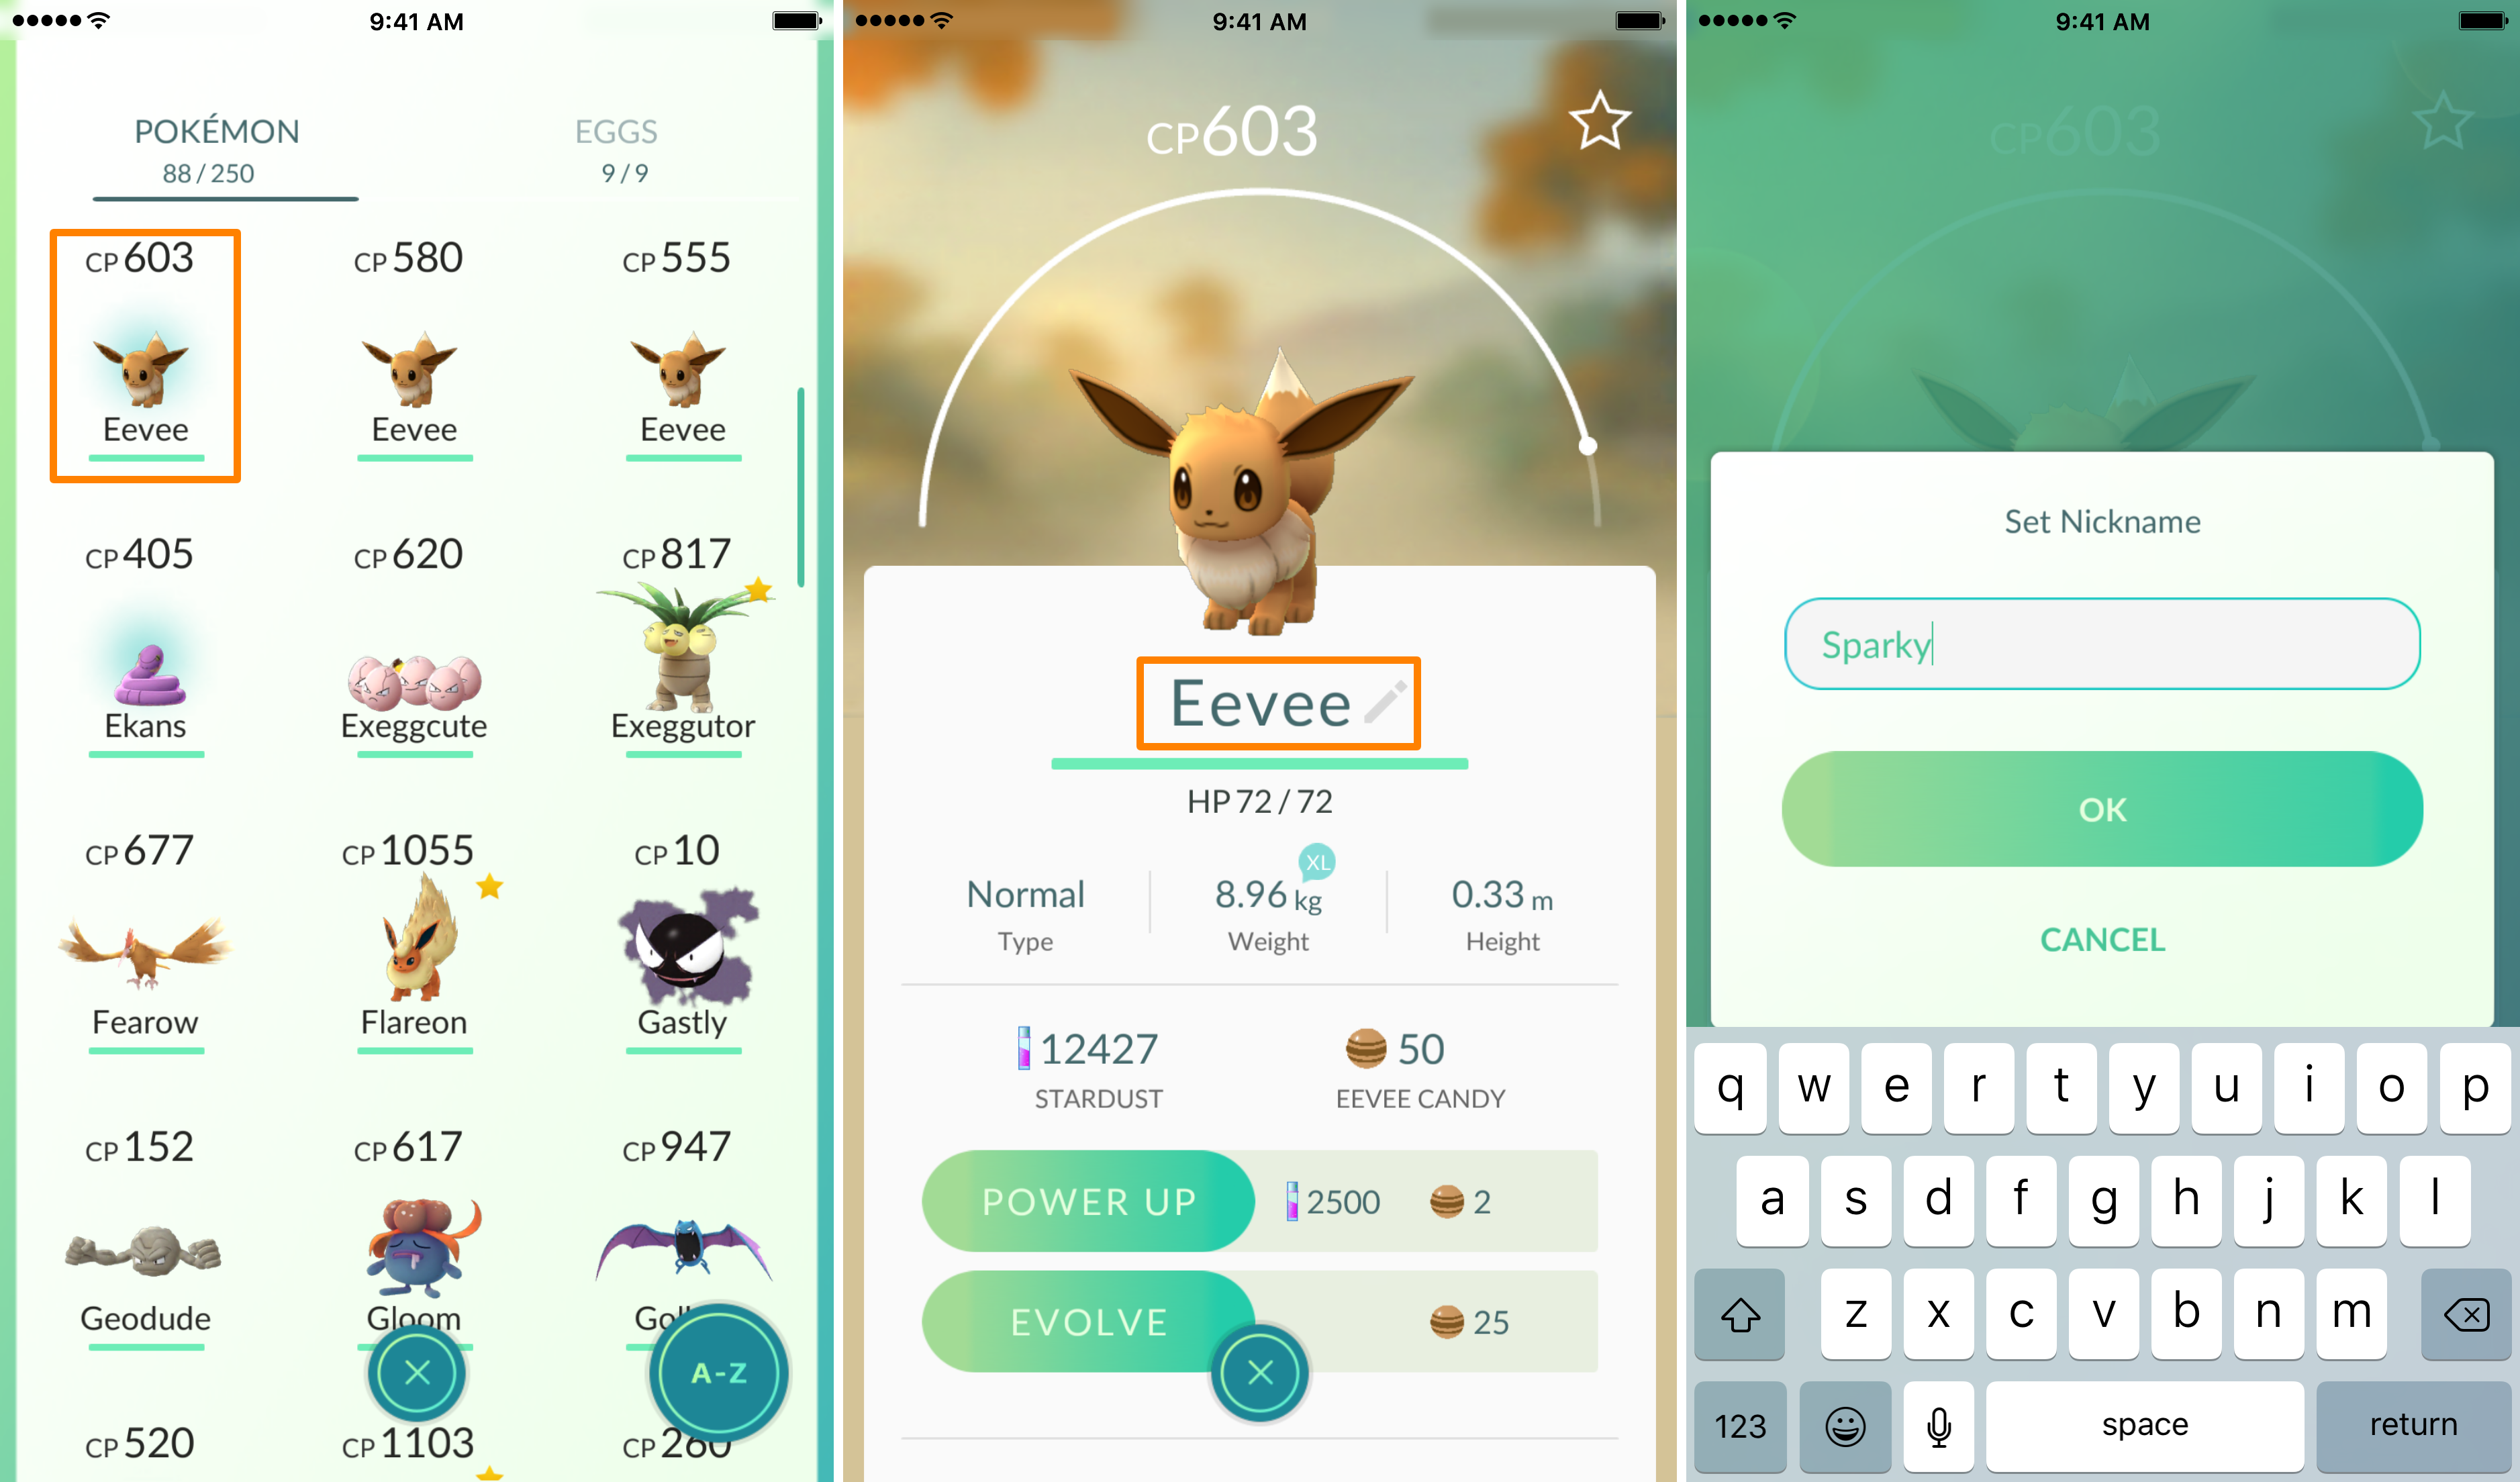 Rename Eevee into Sparky to Evolve into Jolteon